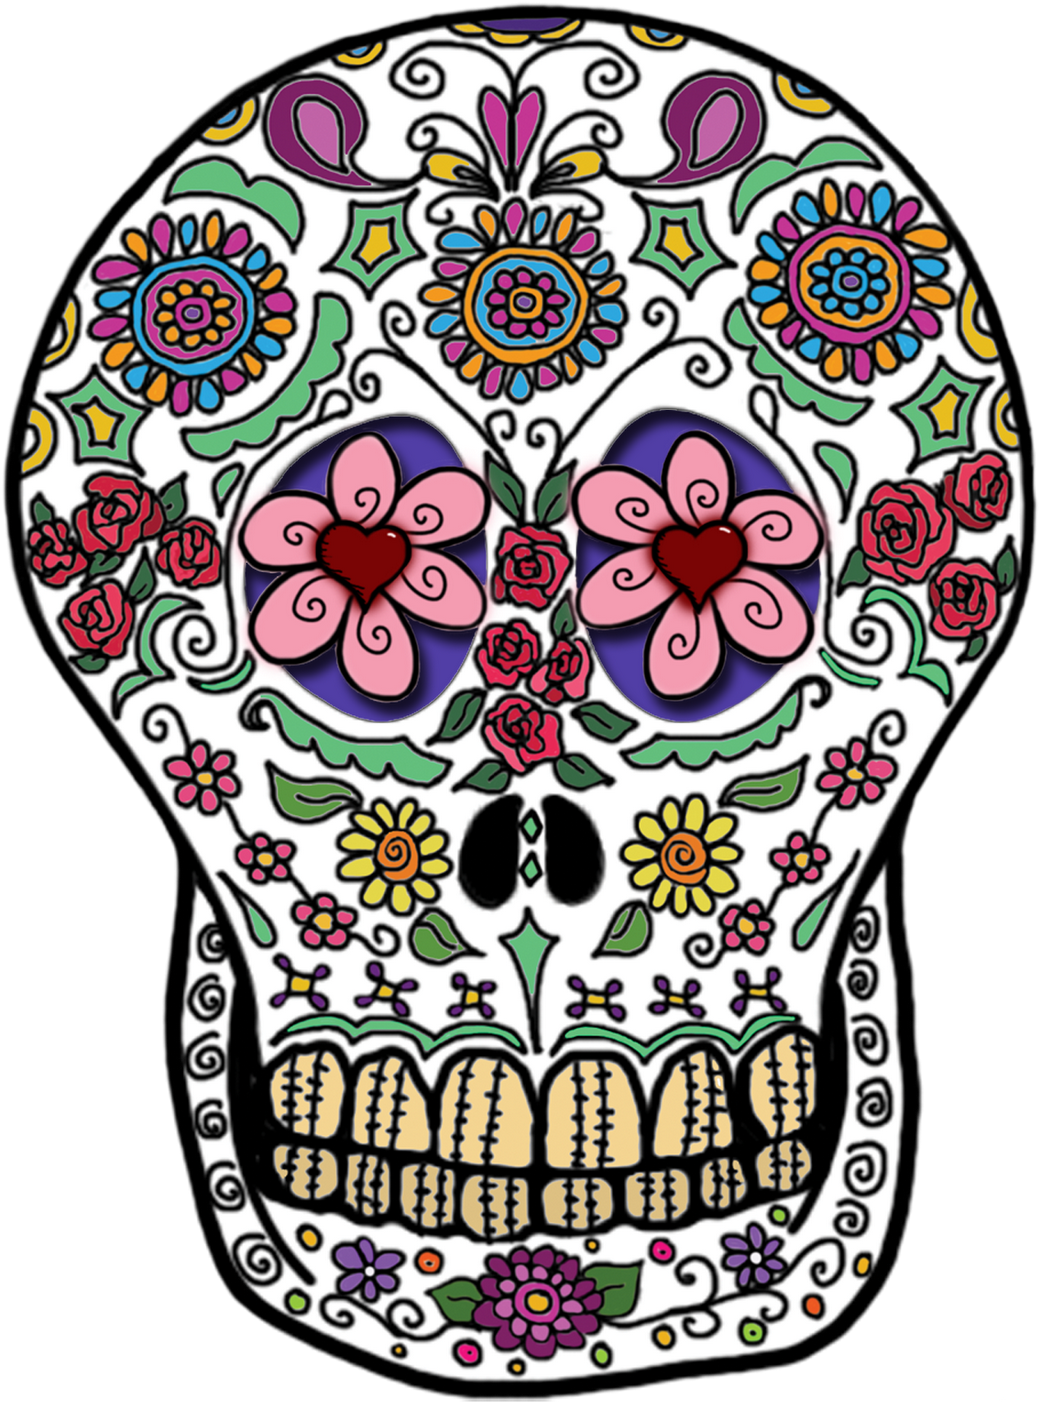 Day Of Dead In Png Image - Decorated Skull, Sugar Skull, Blank Inside Card (1143x1600)